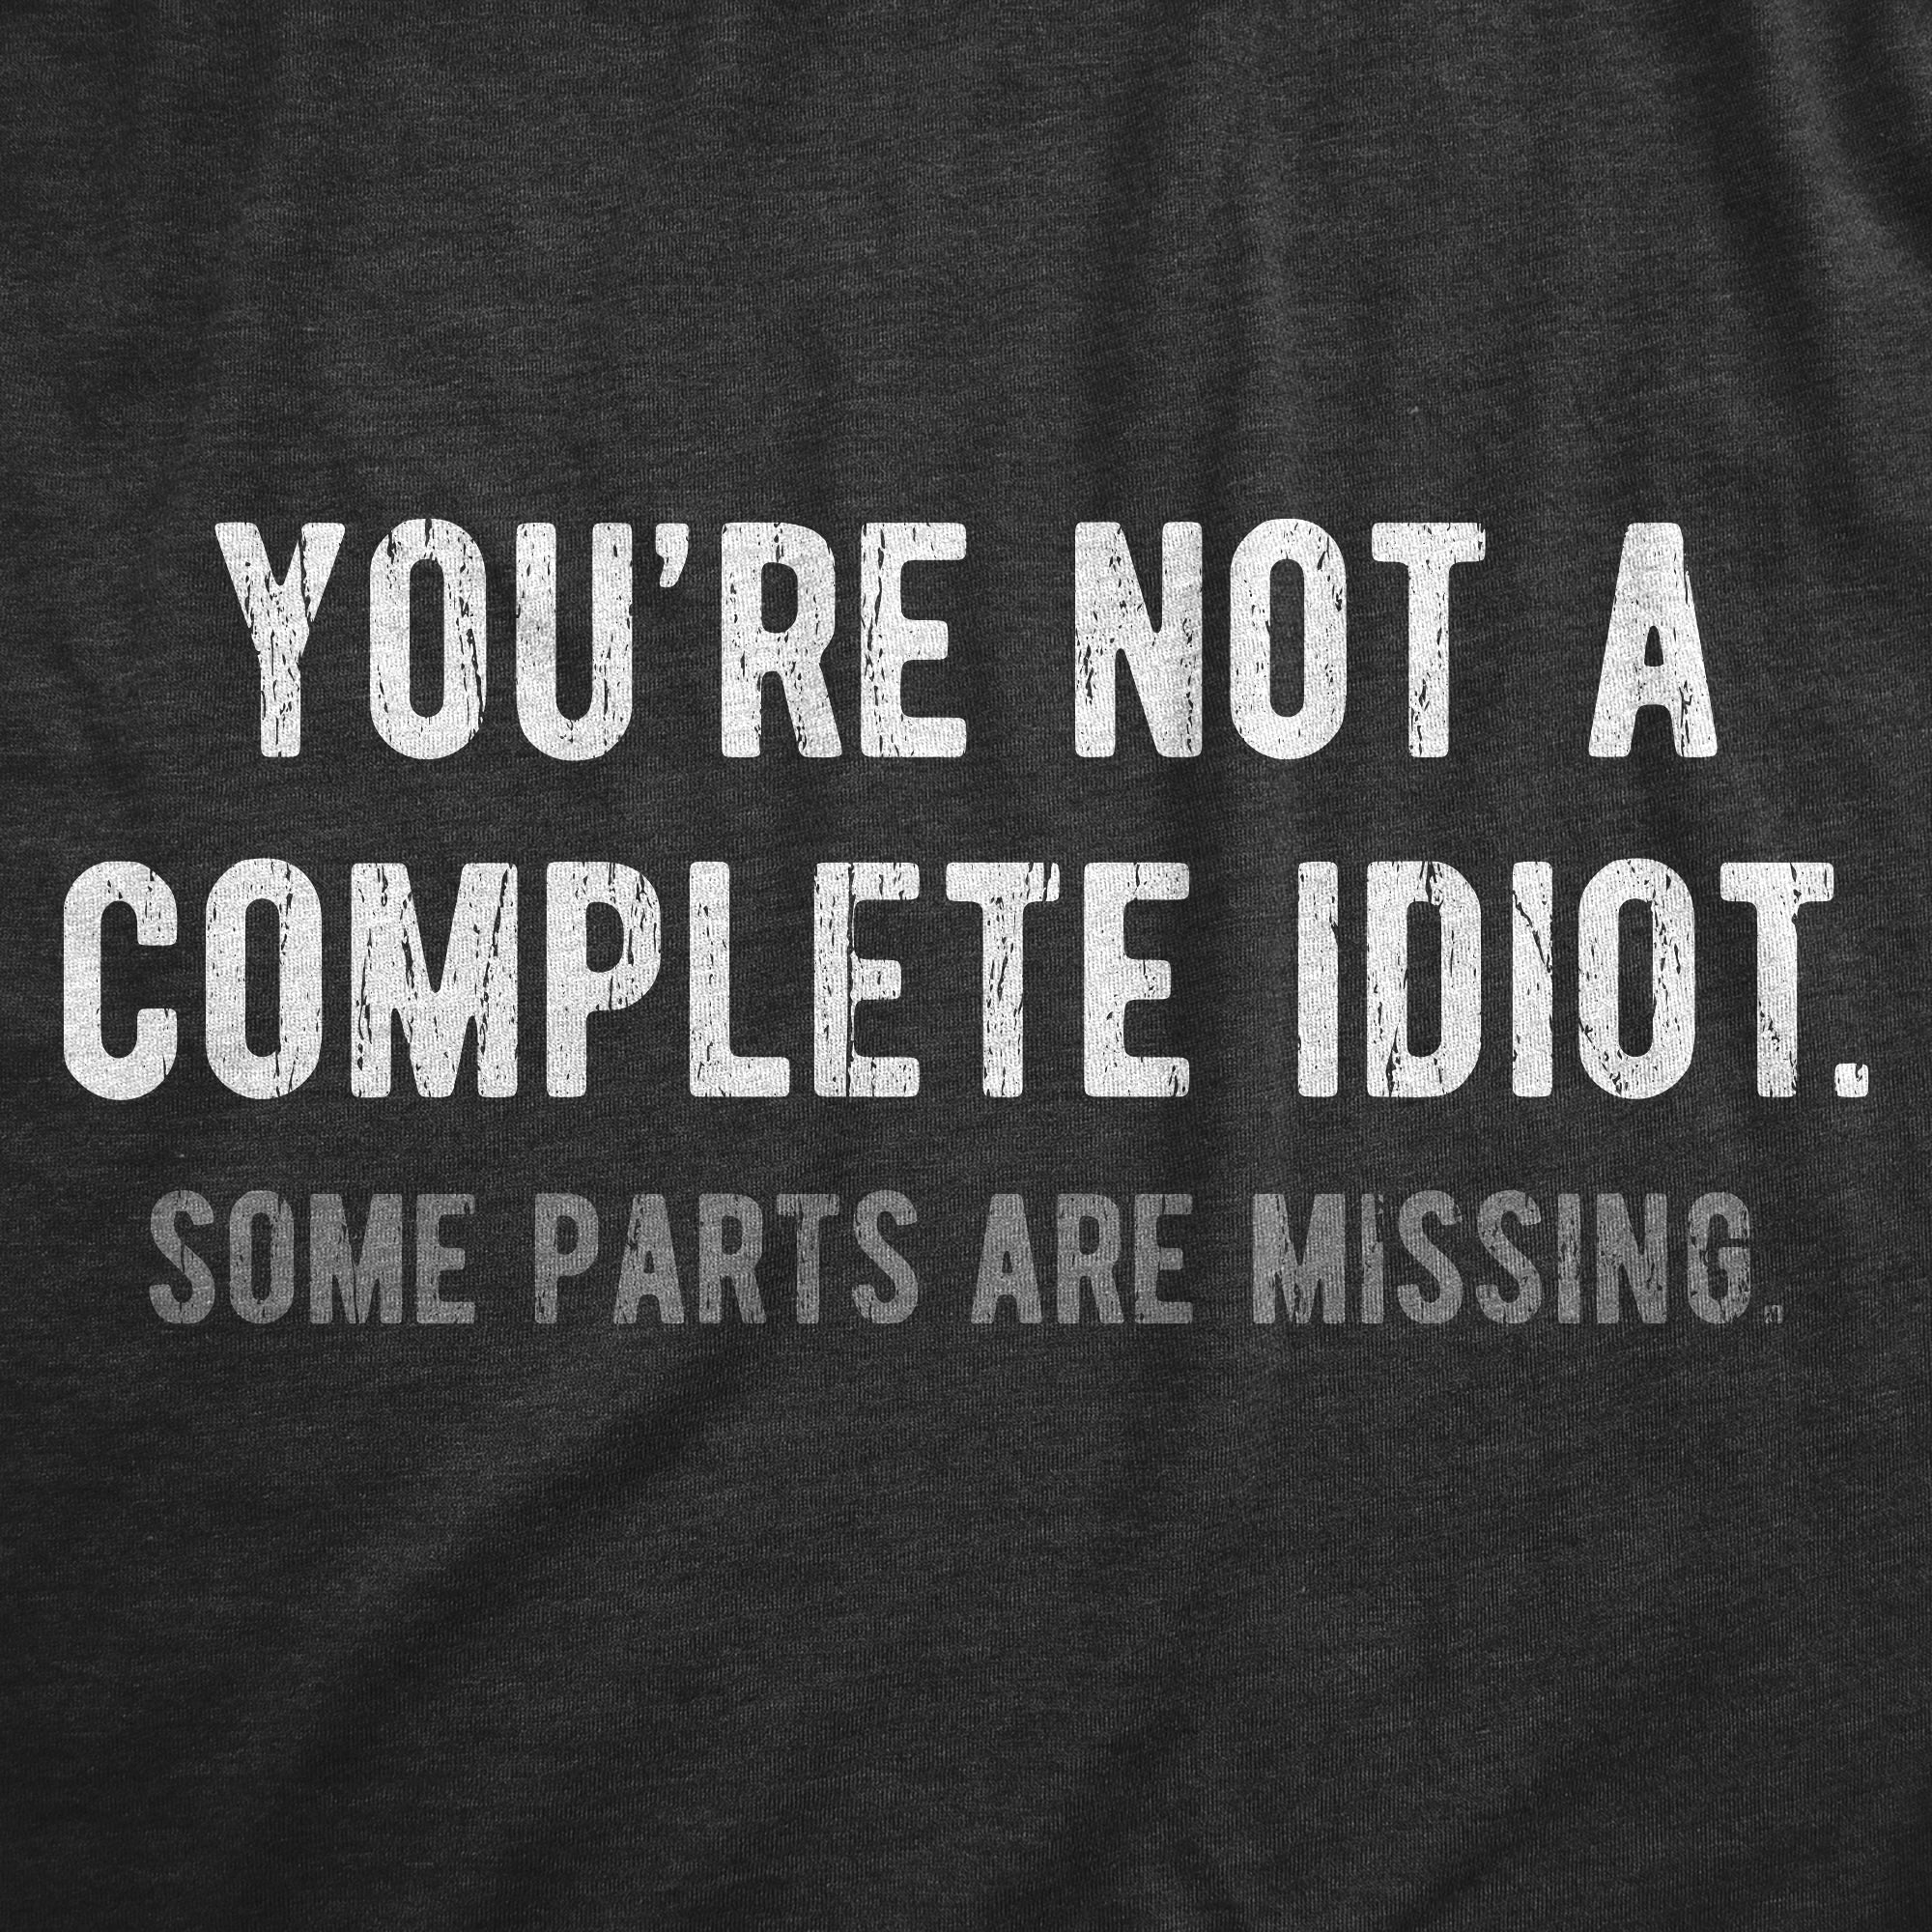 Funny Heather Black - IDIOT Youre Not A Complete Idiot Some Parts Are Missing Mens T Shirt Nerdy Sarcastic Tee